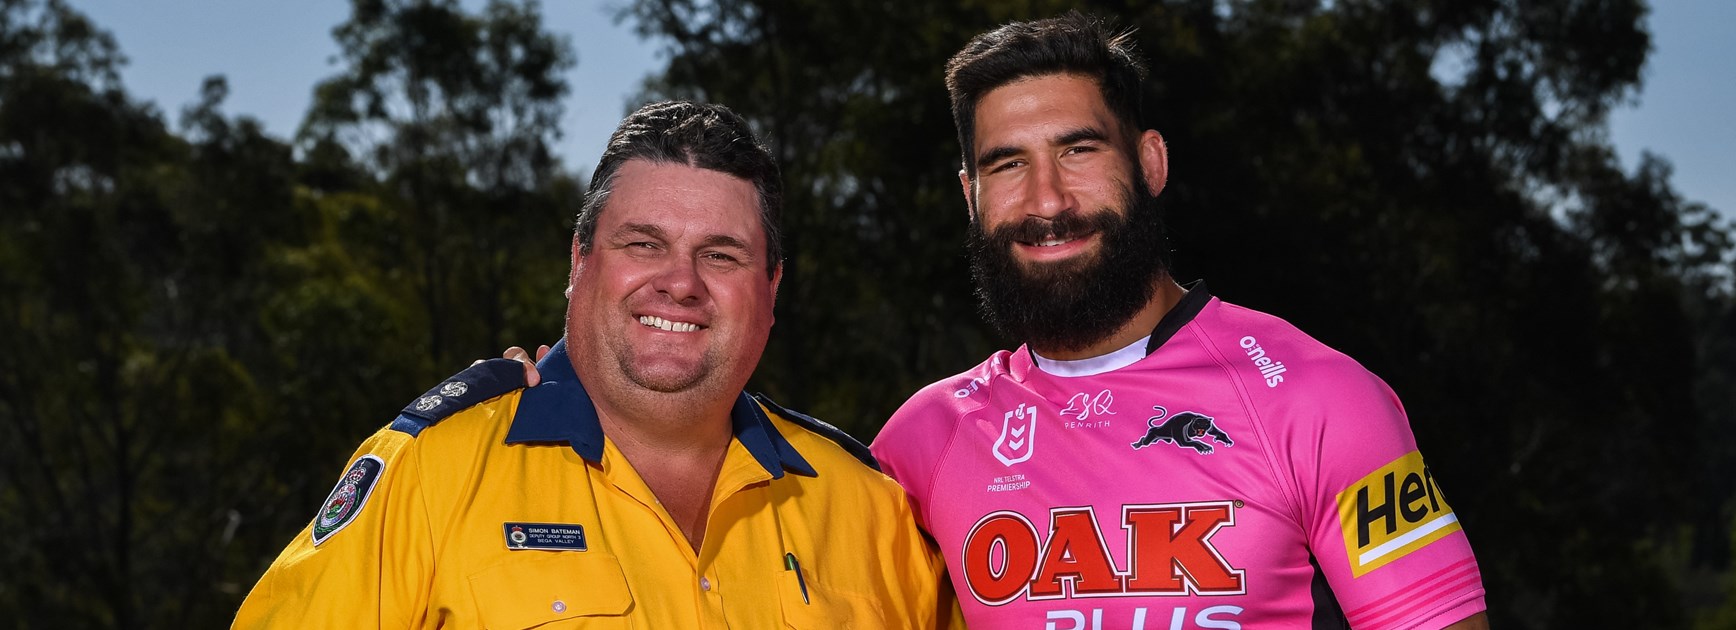 Tamou draws inspiration from firefighter courage